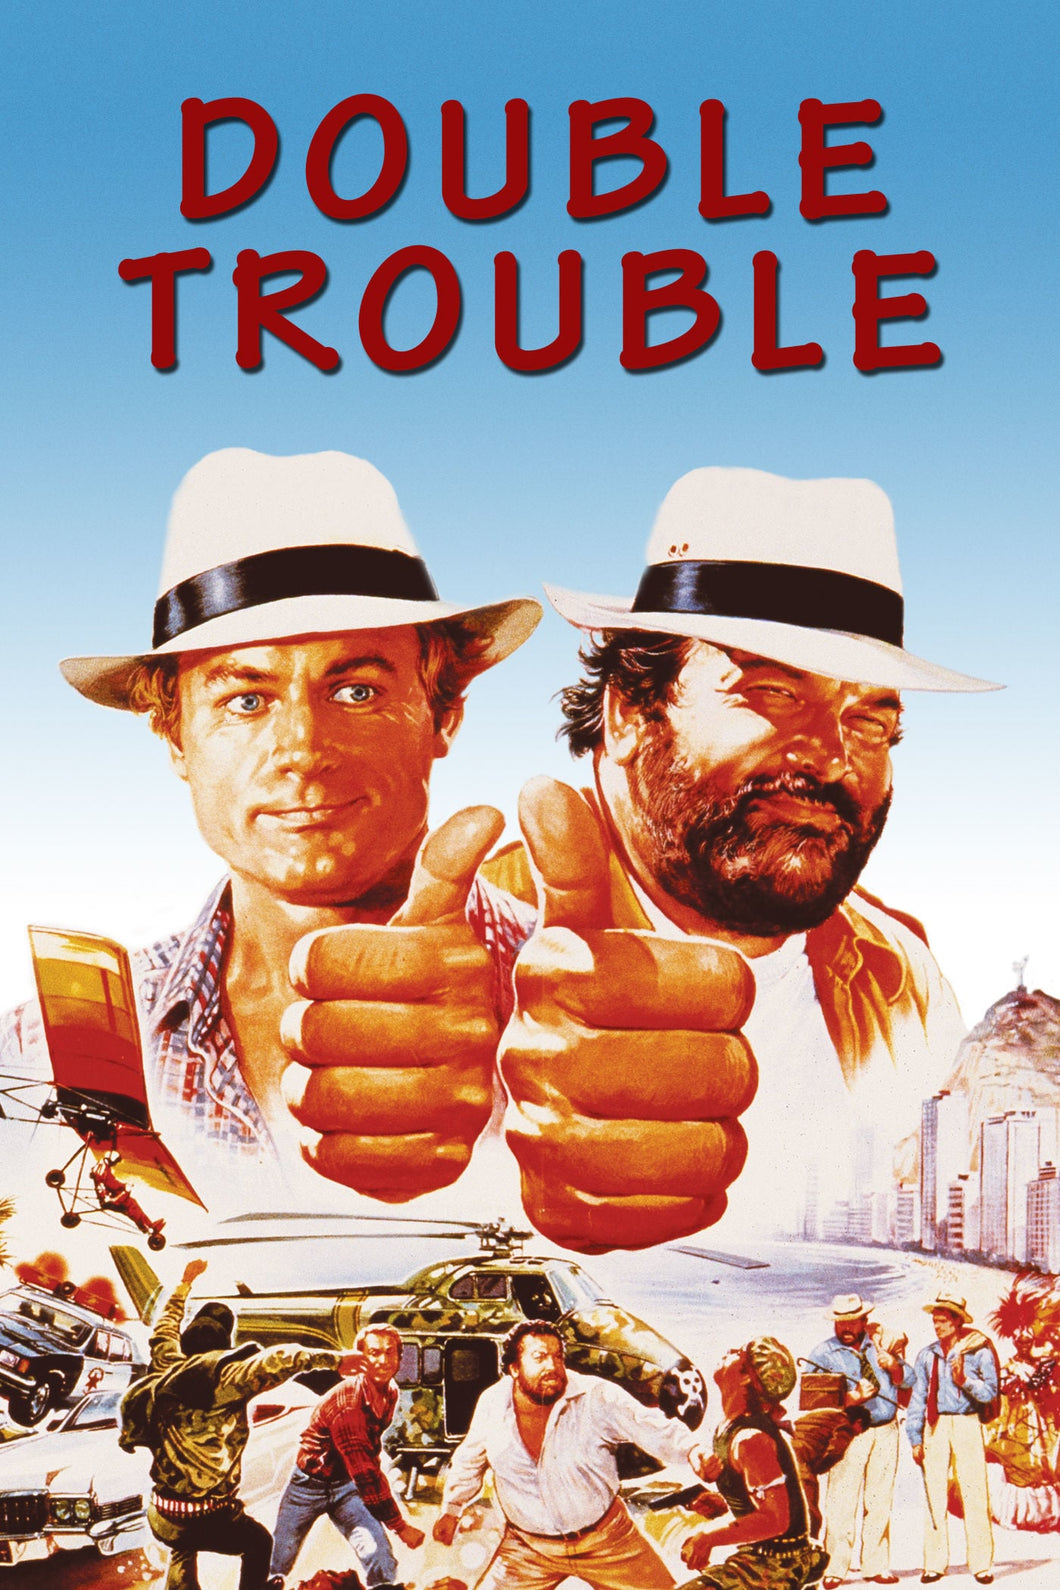 Double Trouble (1984) Movie Poster Framed or Unframed Glossy Poster Free UK Shipping!!!